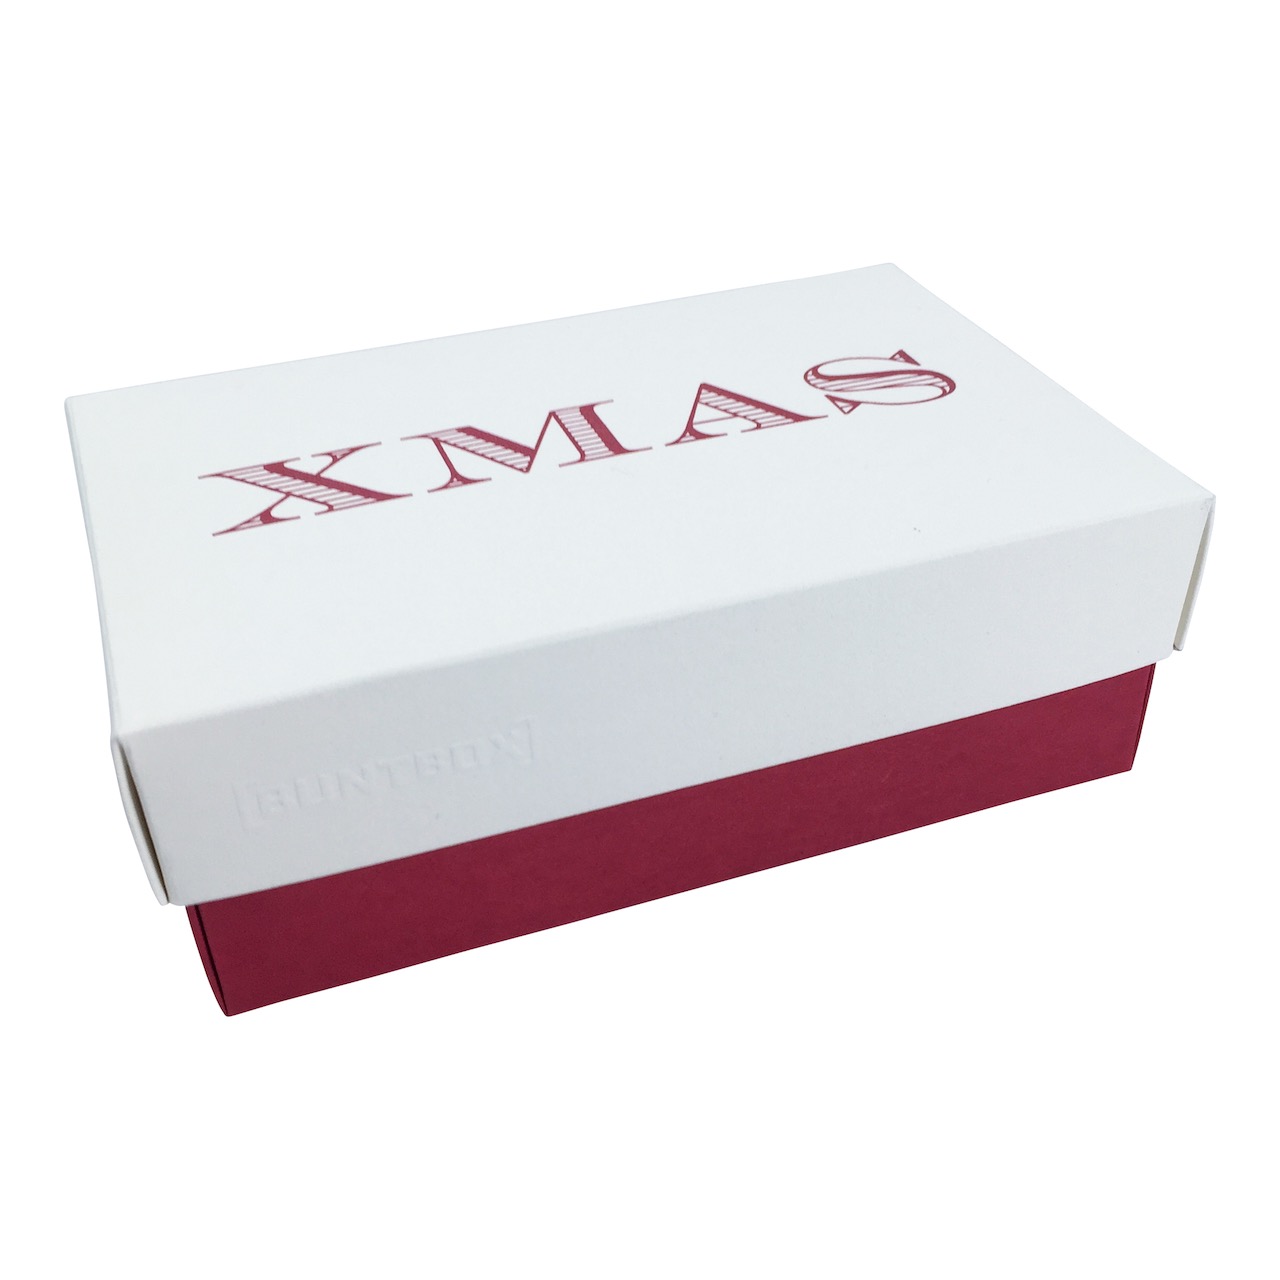 Buntbox S Fine Paper XMAS in Champagner-Bordeaux